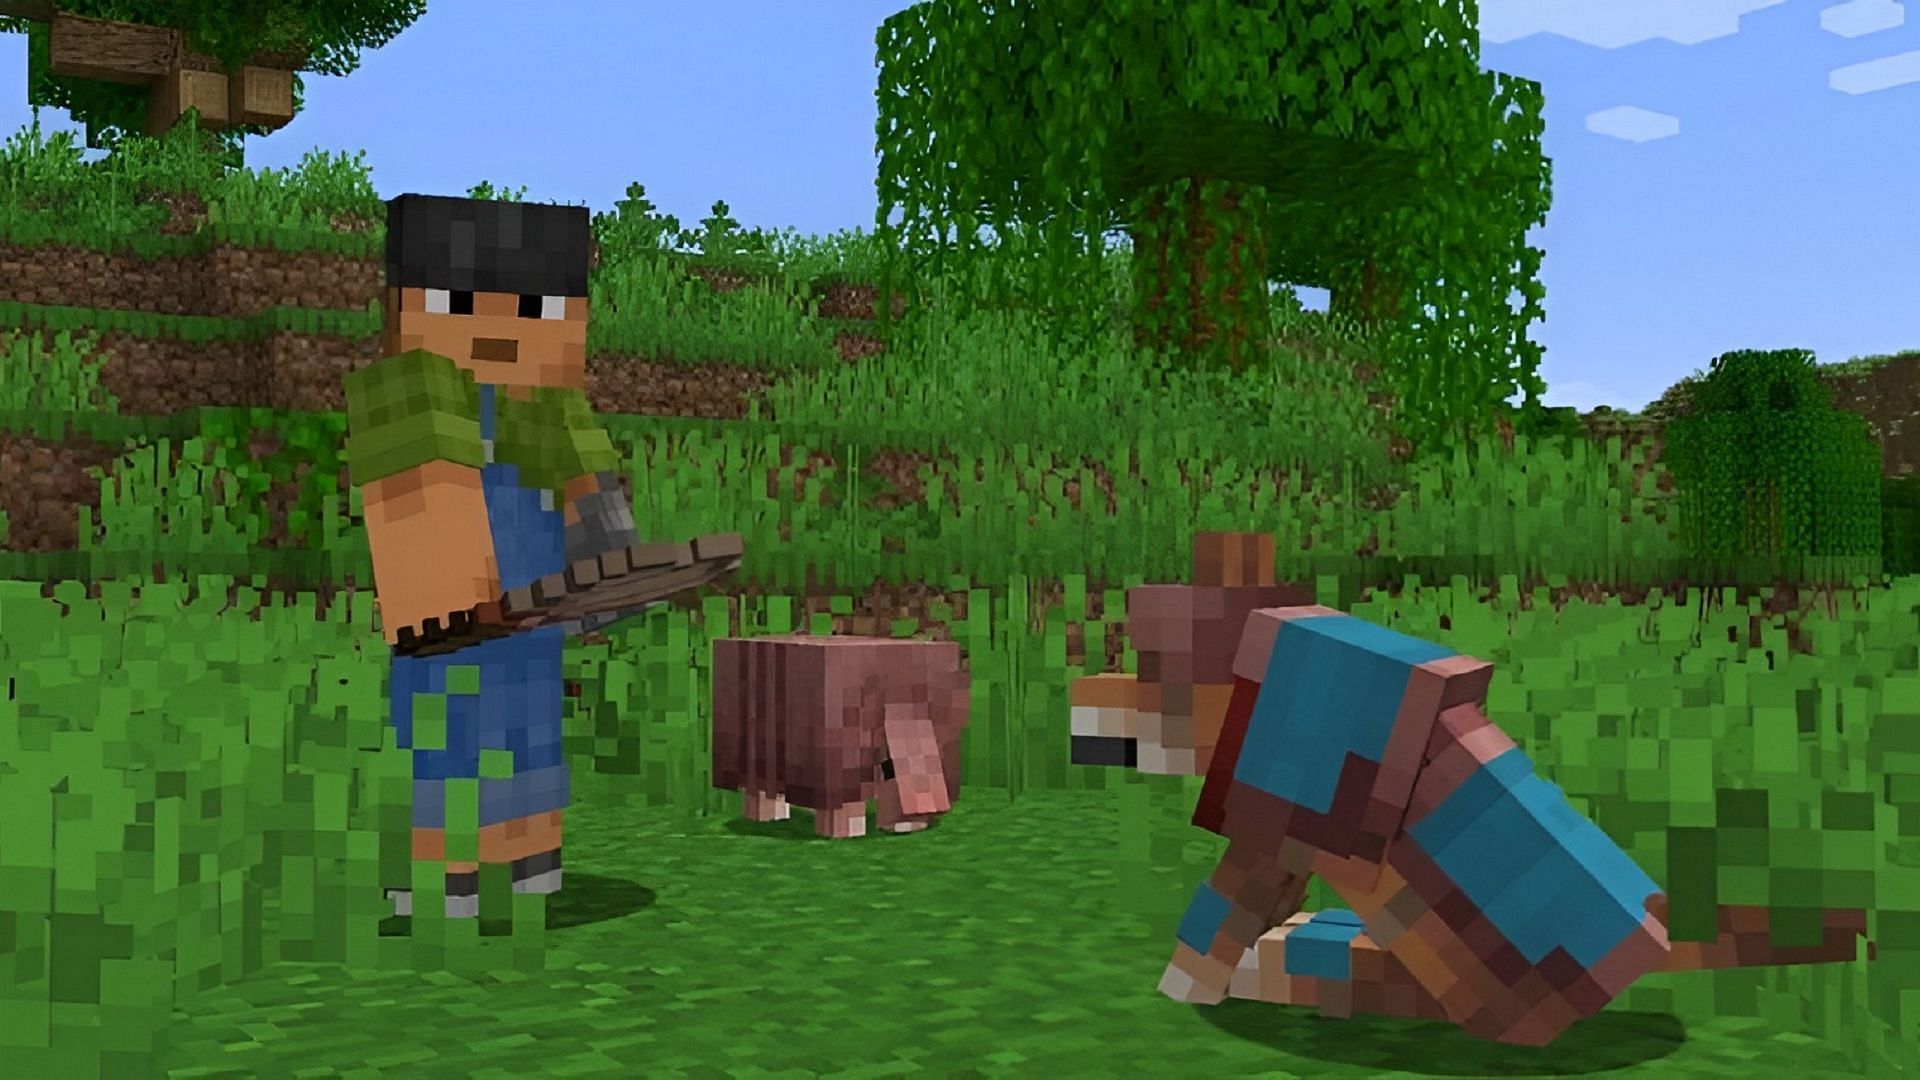 One of the most demanded Minecraft features is expected to release next week